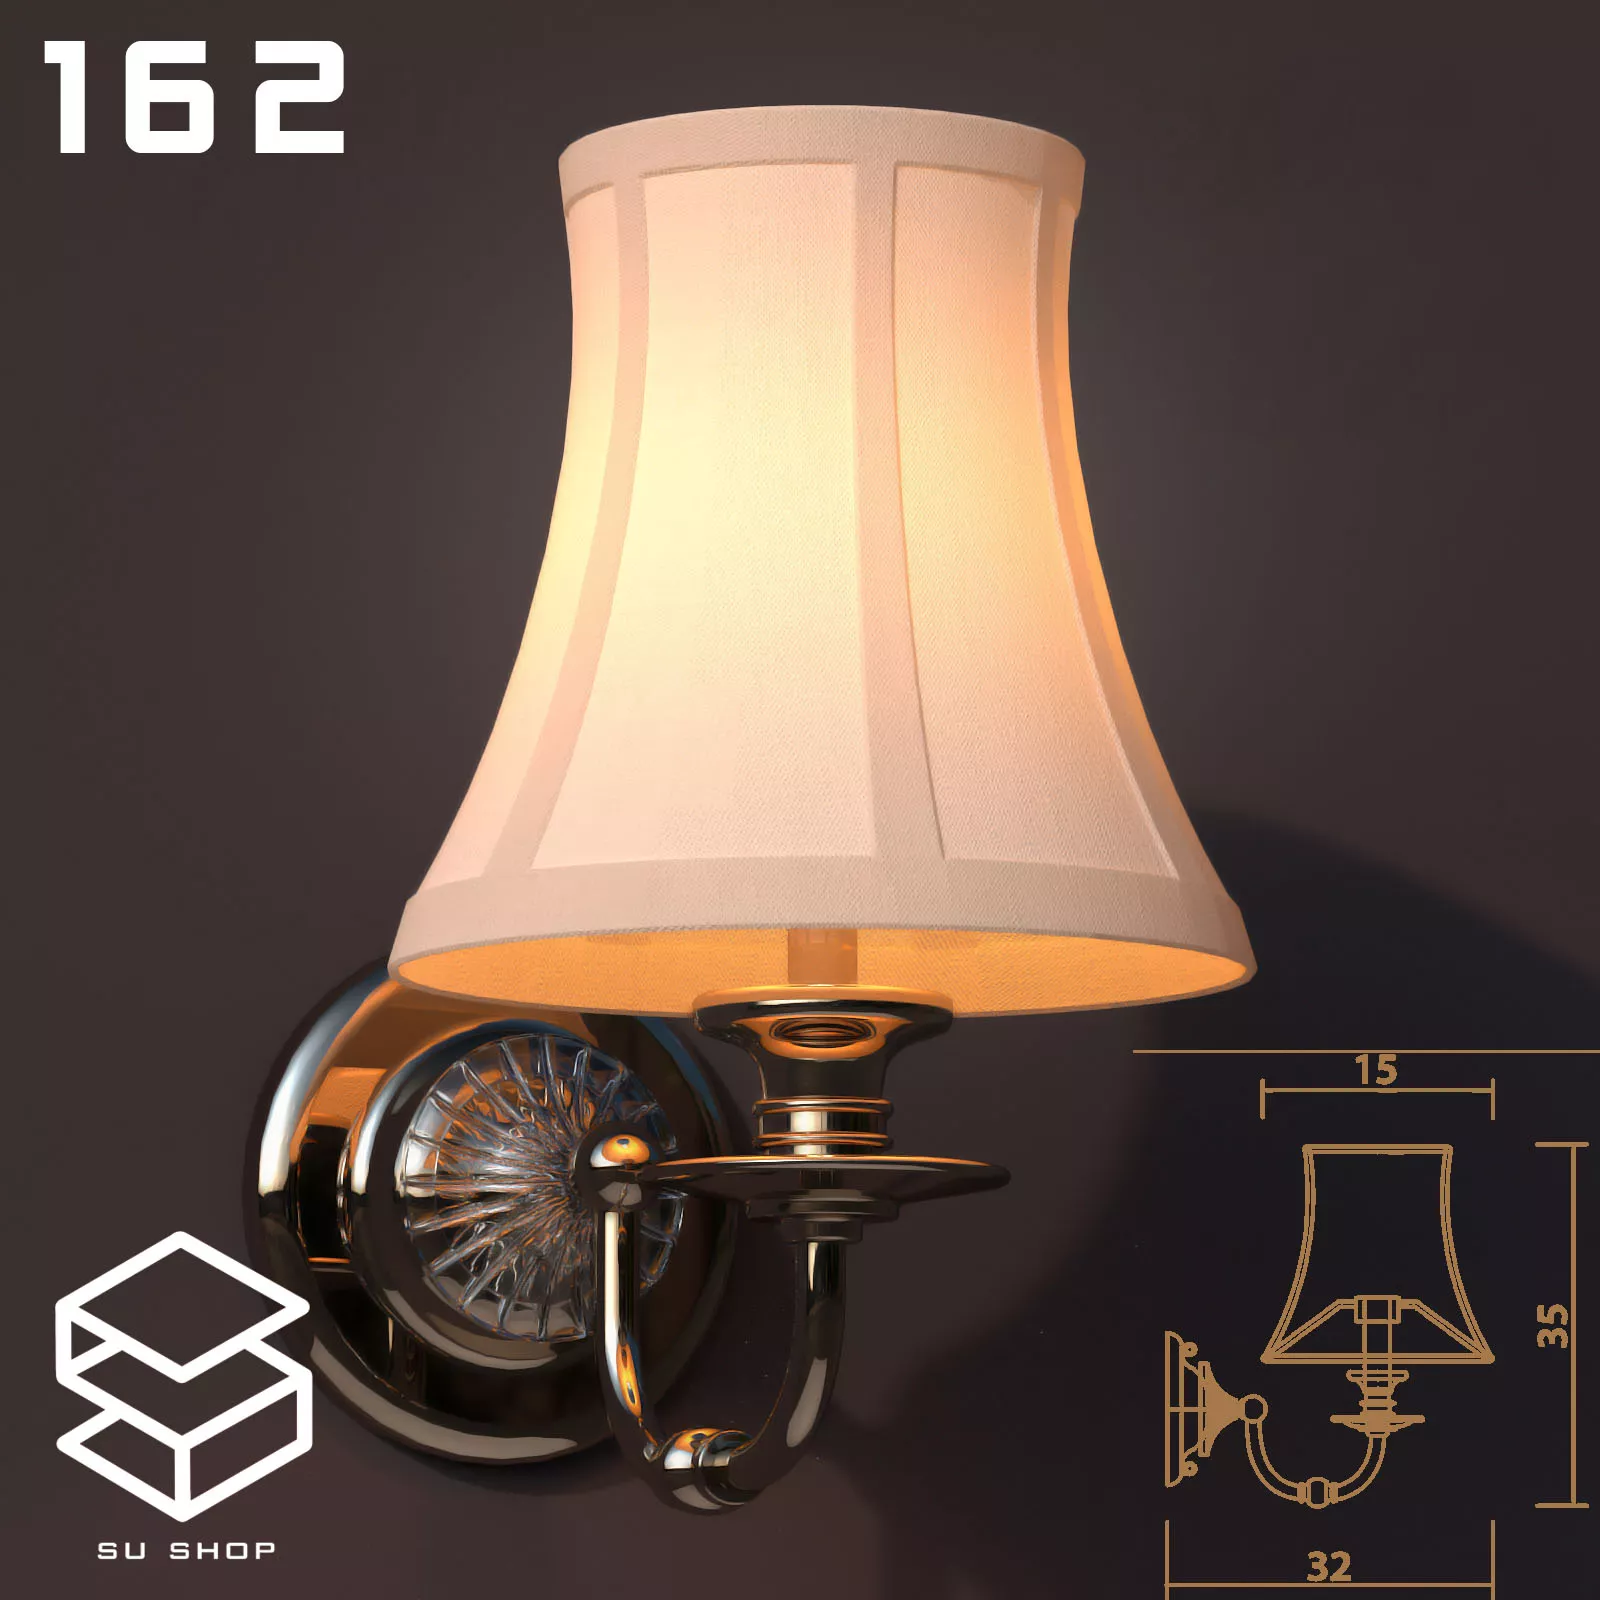 MODERN WALL LAMP - SKETCHUP 3D MODEL - VRAY OR ENSCAPE - ID16178